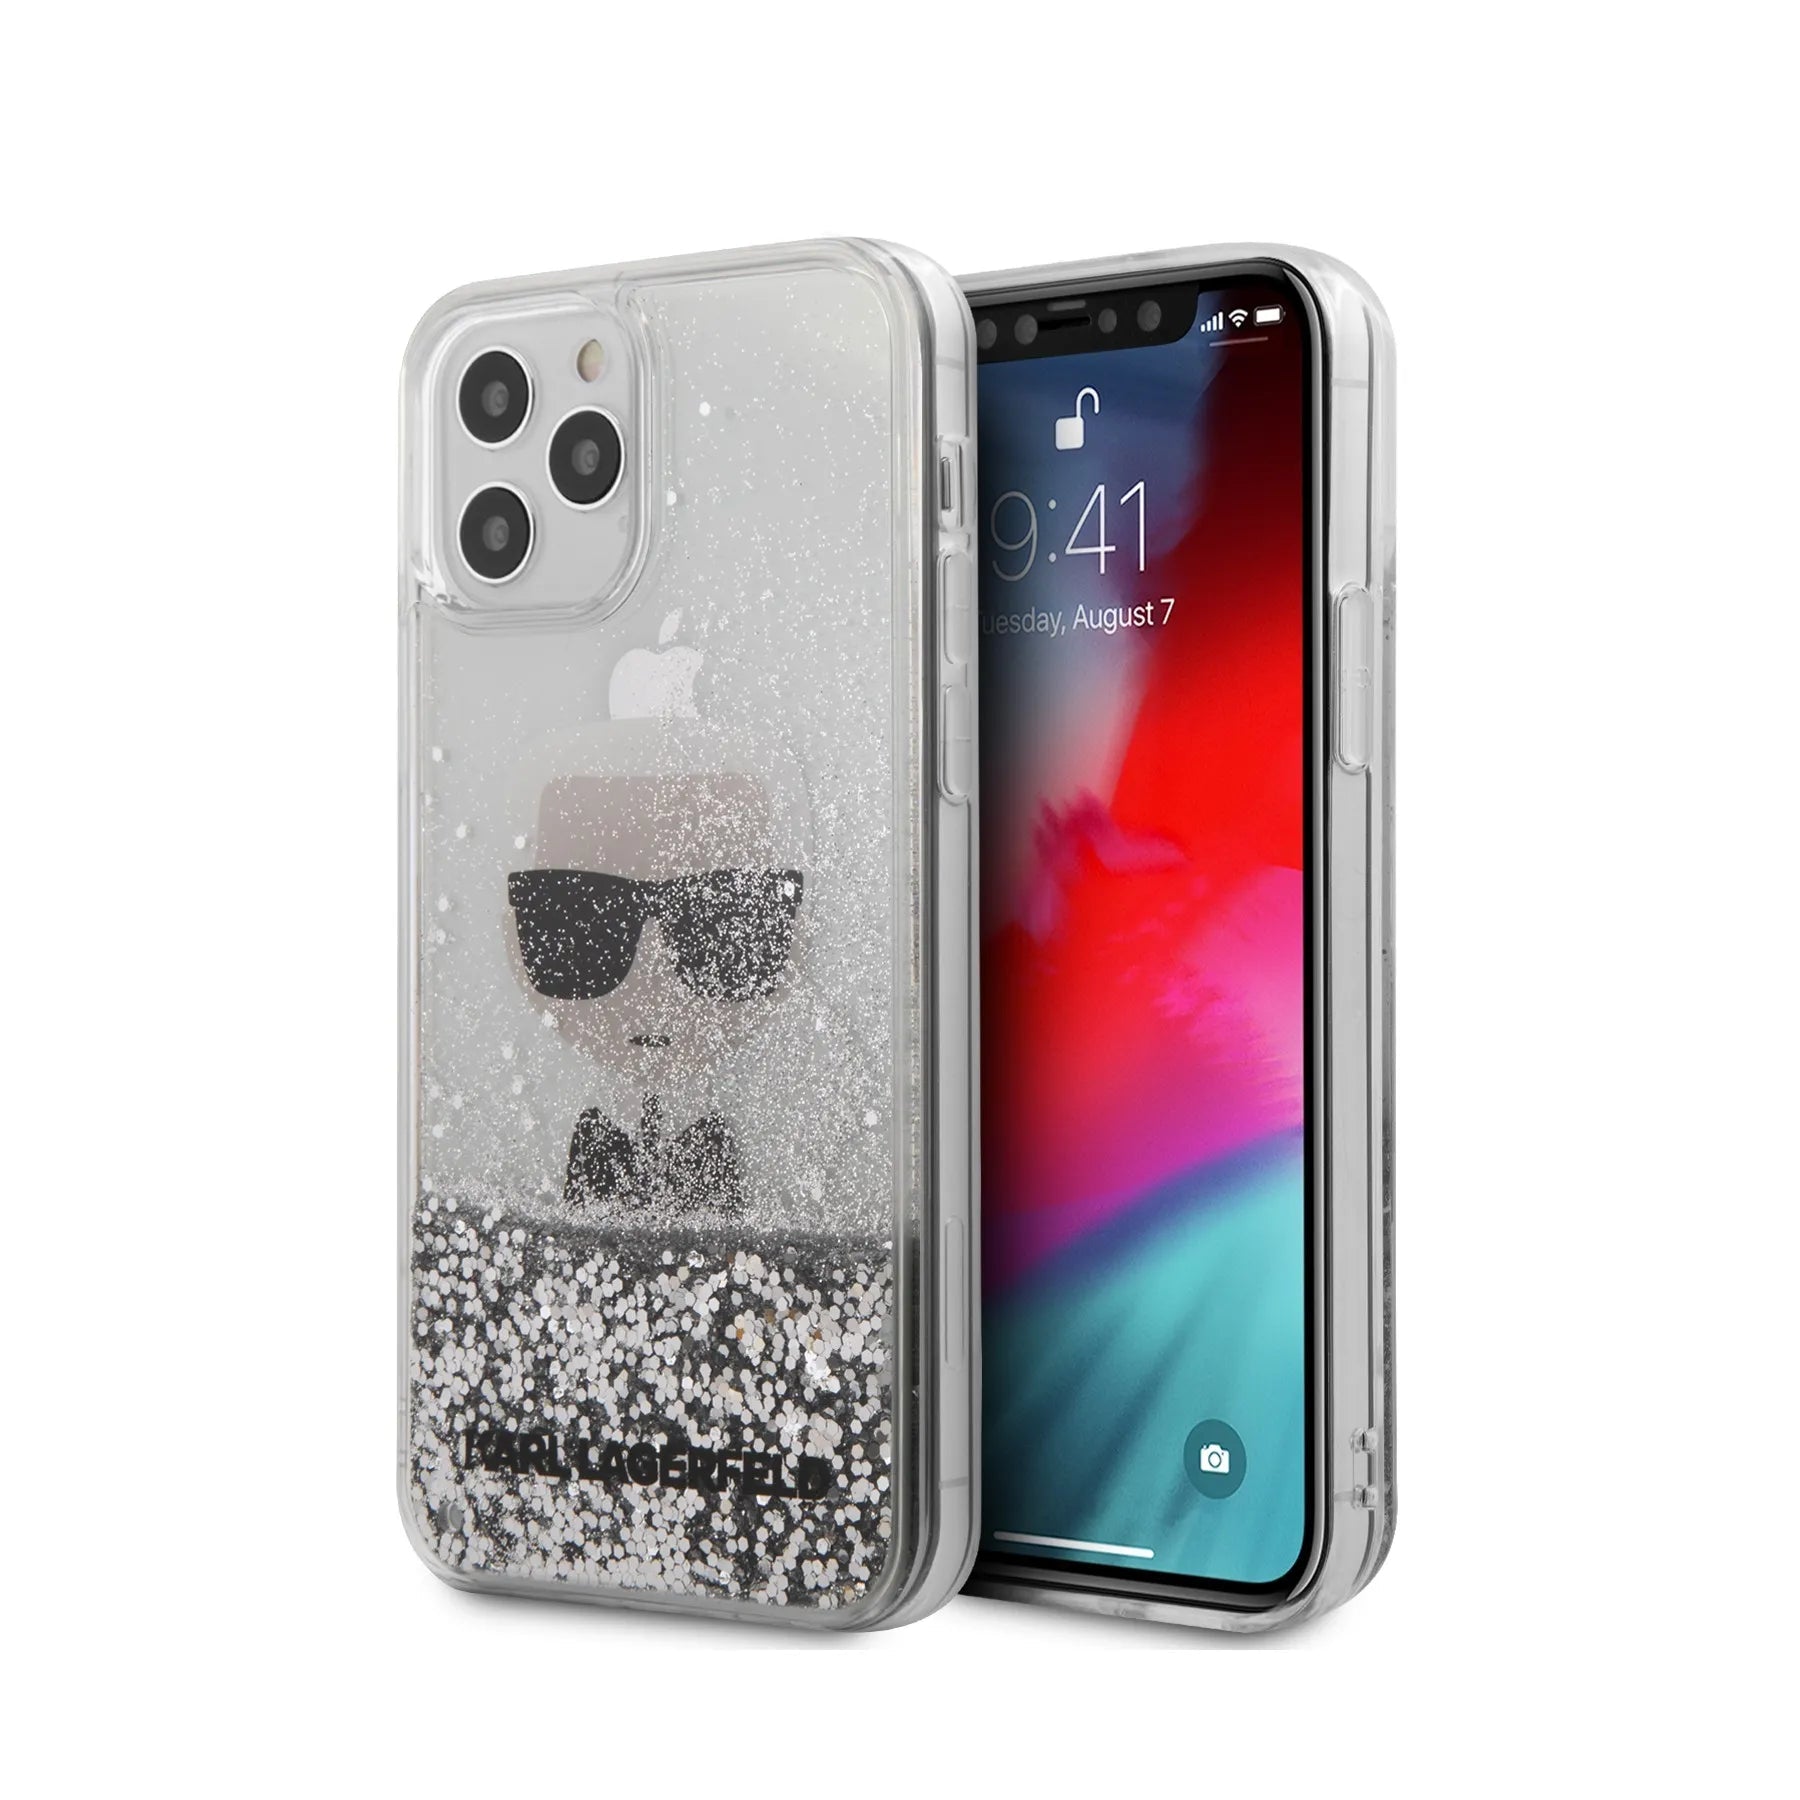 Coque Karl Lagerfeld pour iPhone 12 Pro Max - My Store